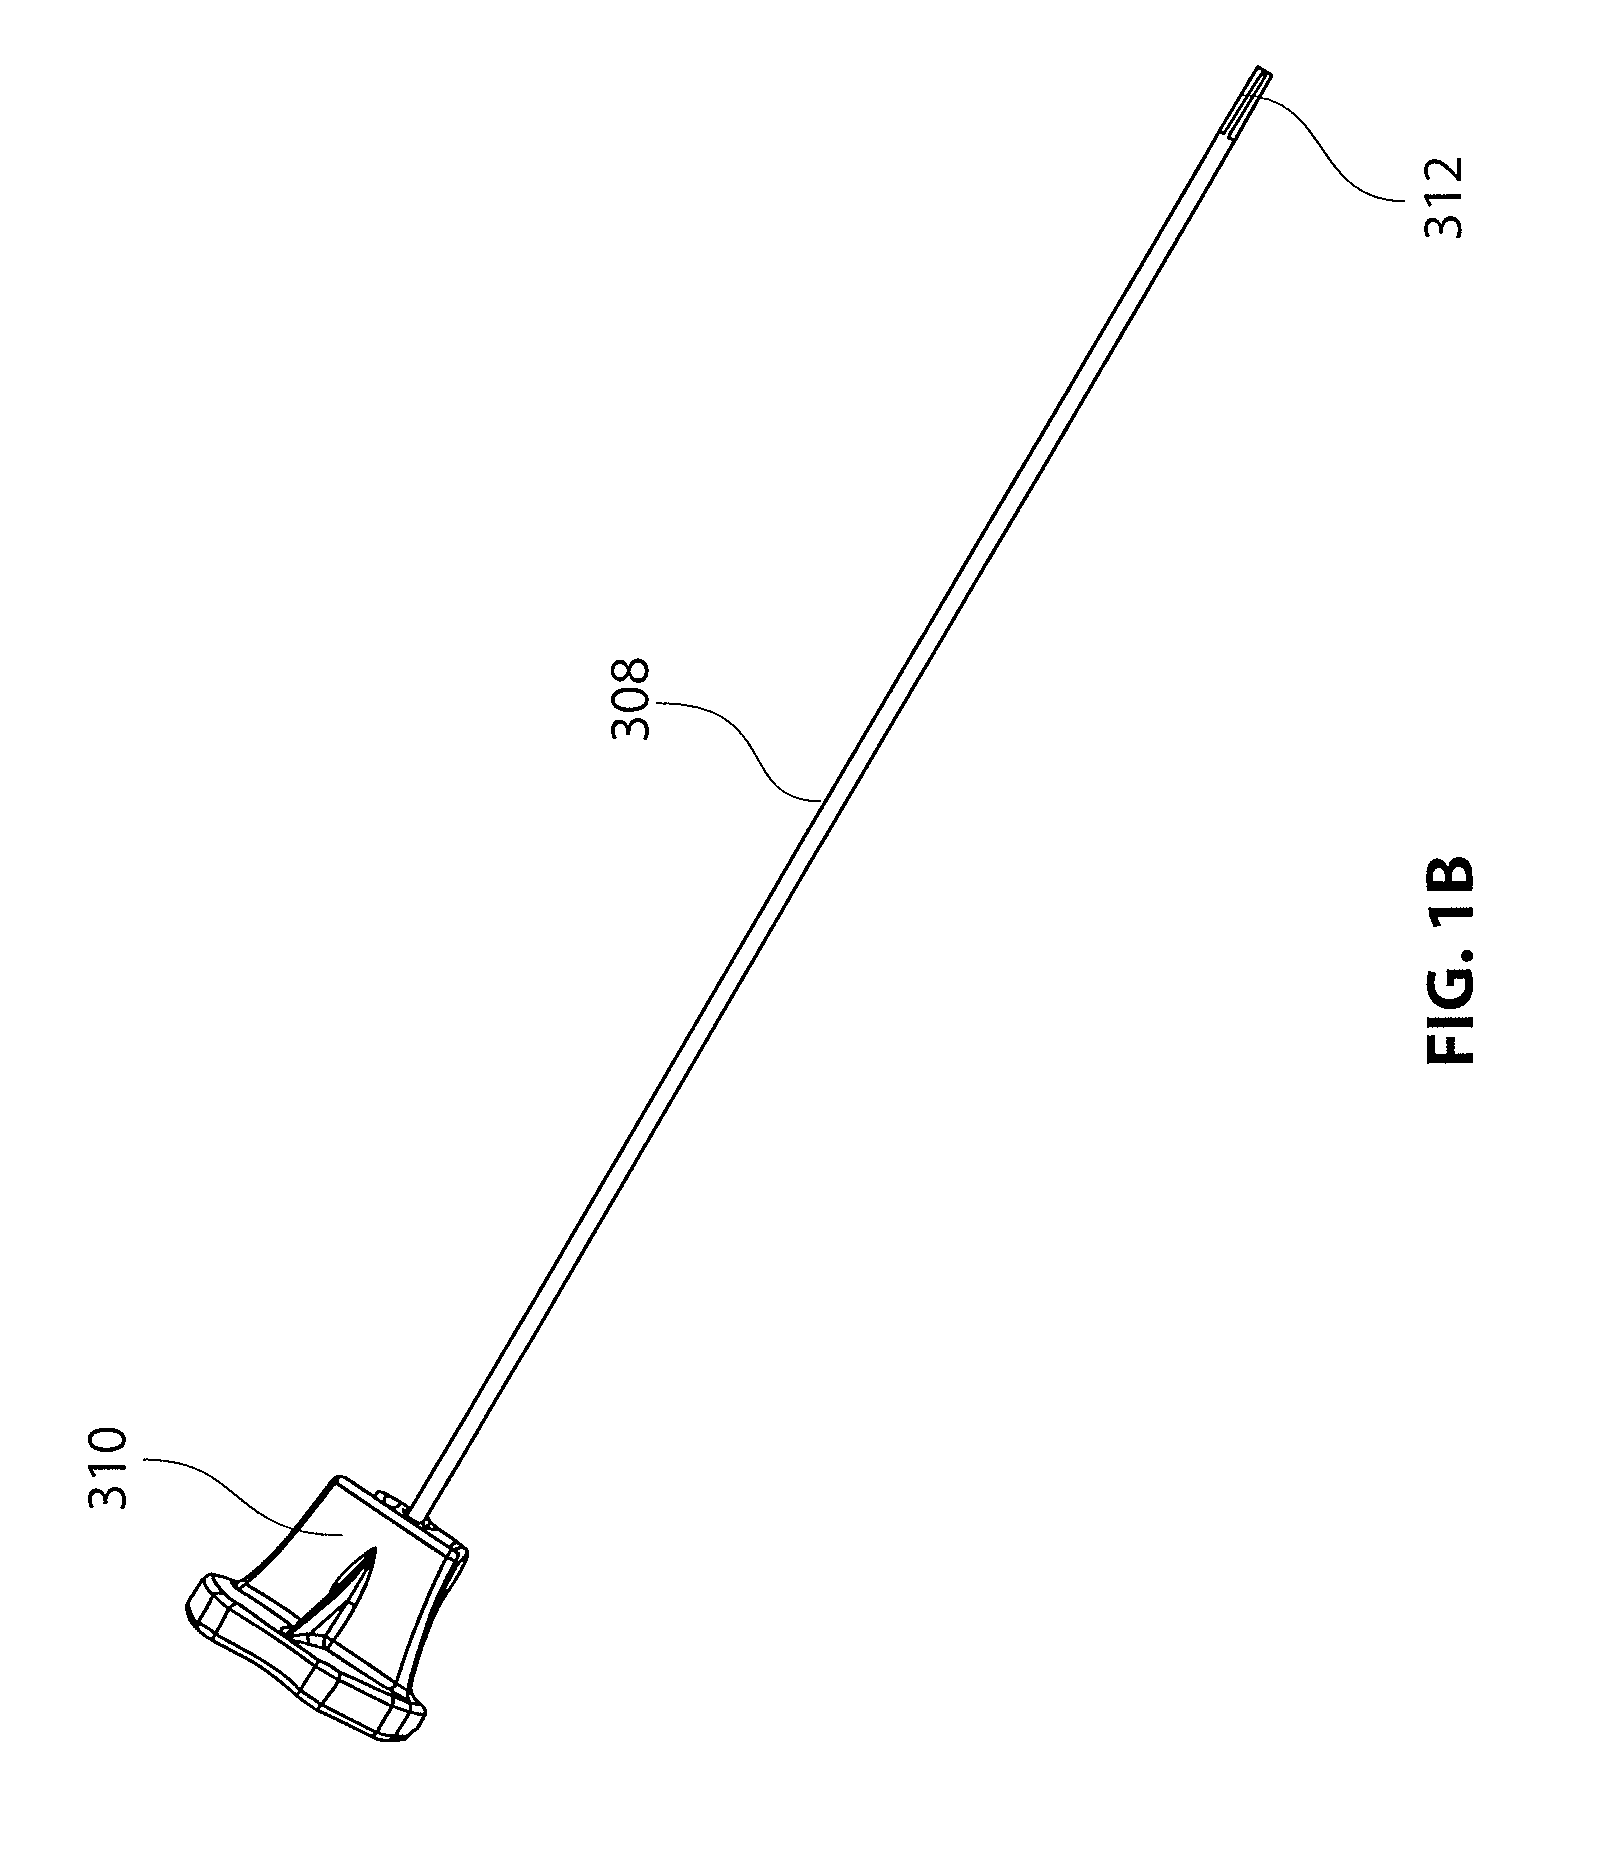 Anatomical location markers and methods of use in positioning sheet-like materials during surgery